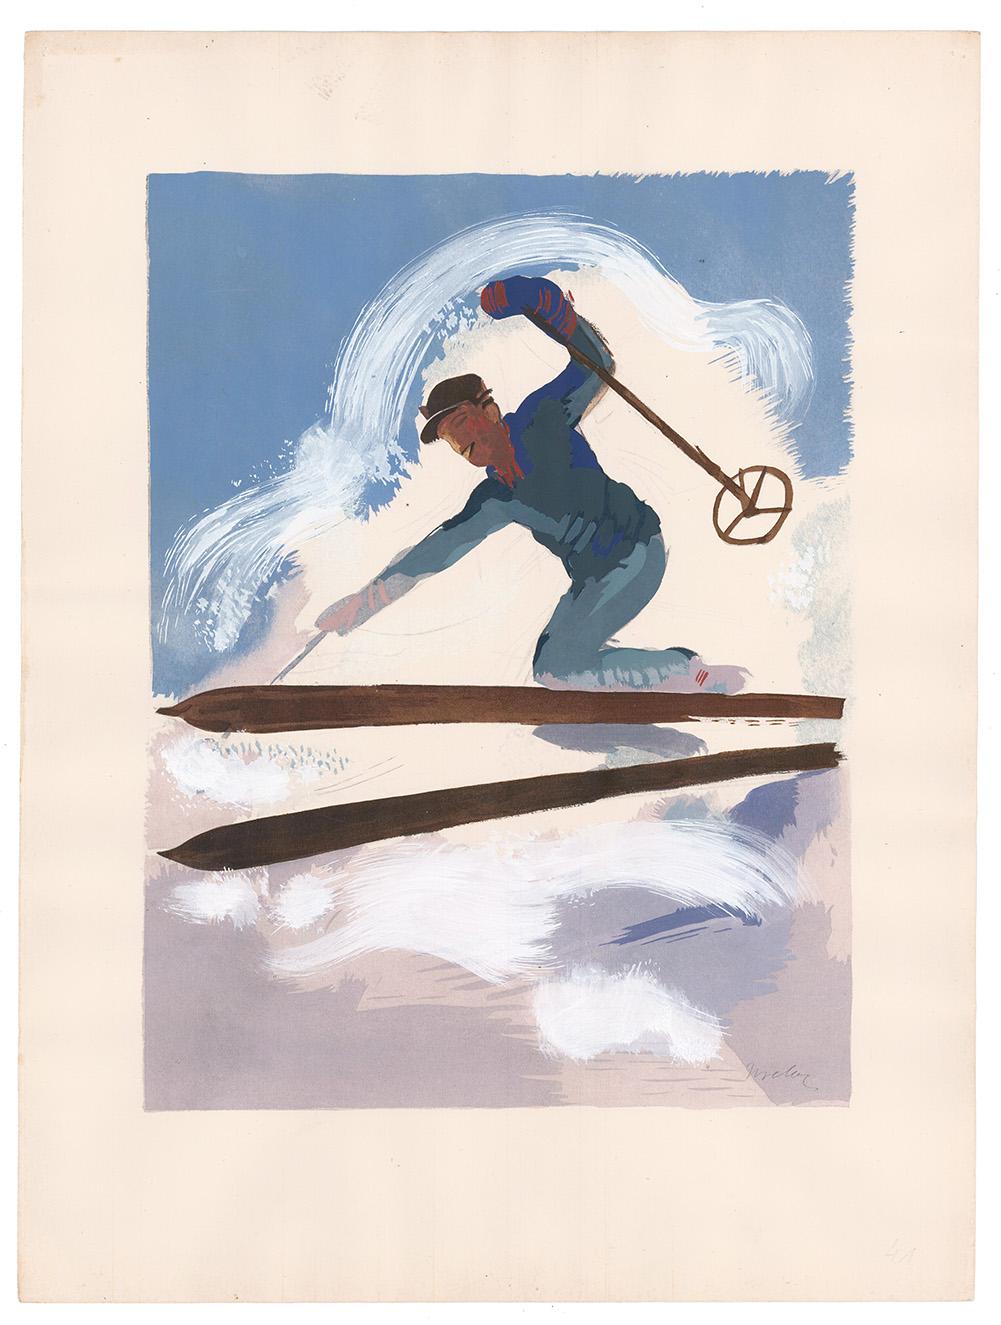 Le Skiing in Silver Frame - Print by Milivoy Uzelac